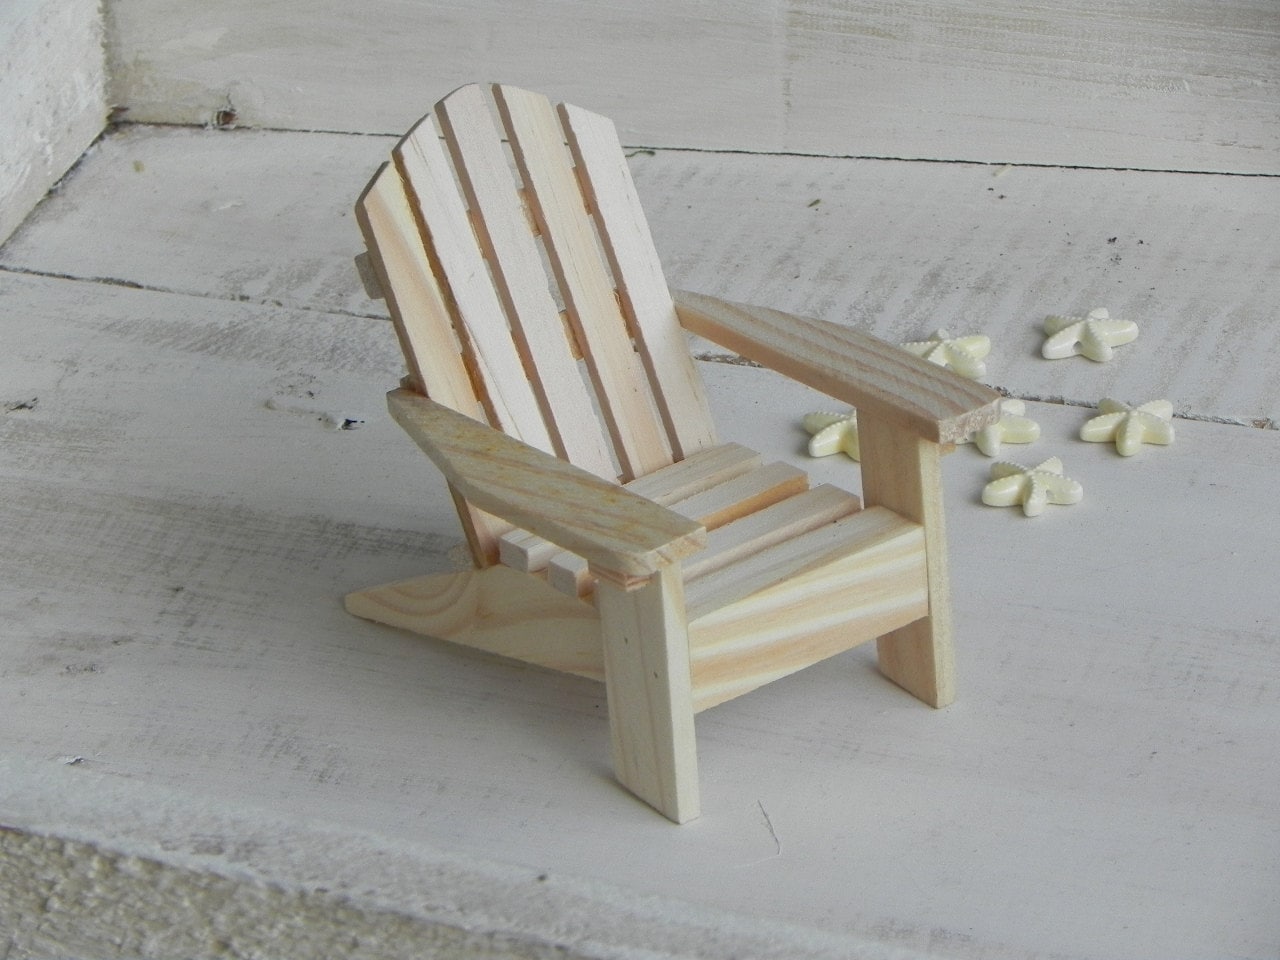 Adirondack Chair miniature ready to paint wood supplies for